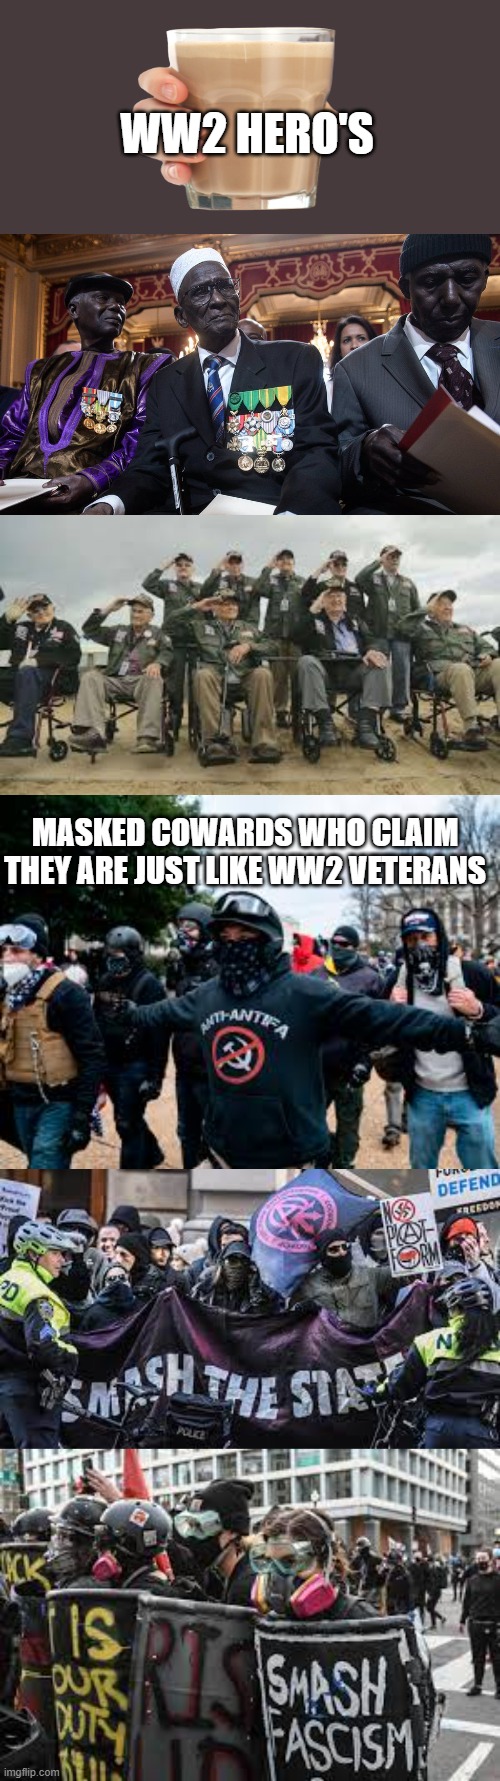 REAL VS FAKE |  WW2 HERO'S; MASKED COWARDS WHO CLAIM THEY ARE JUST LIKE WW2 VETERANS | image tagged in ww2,antifa | made w/ Imgflip meme maker